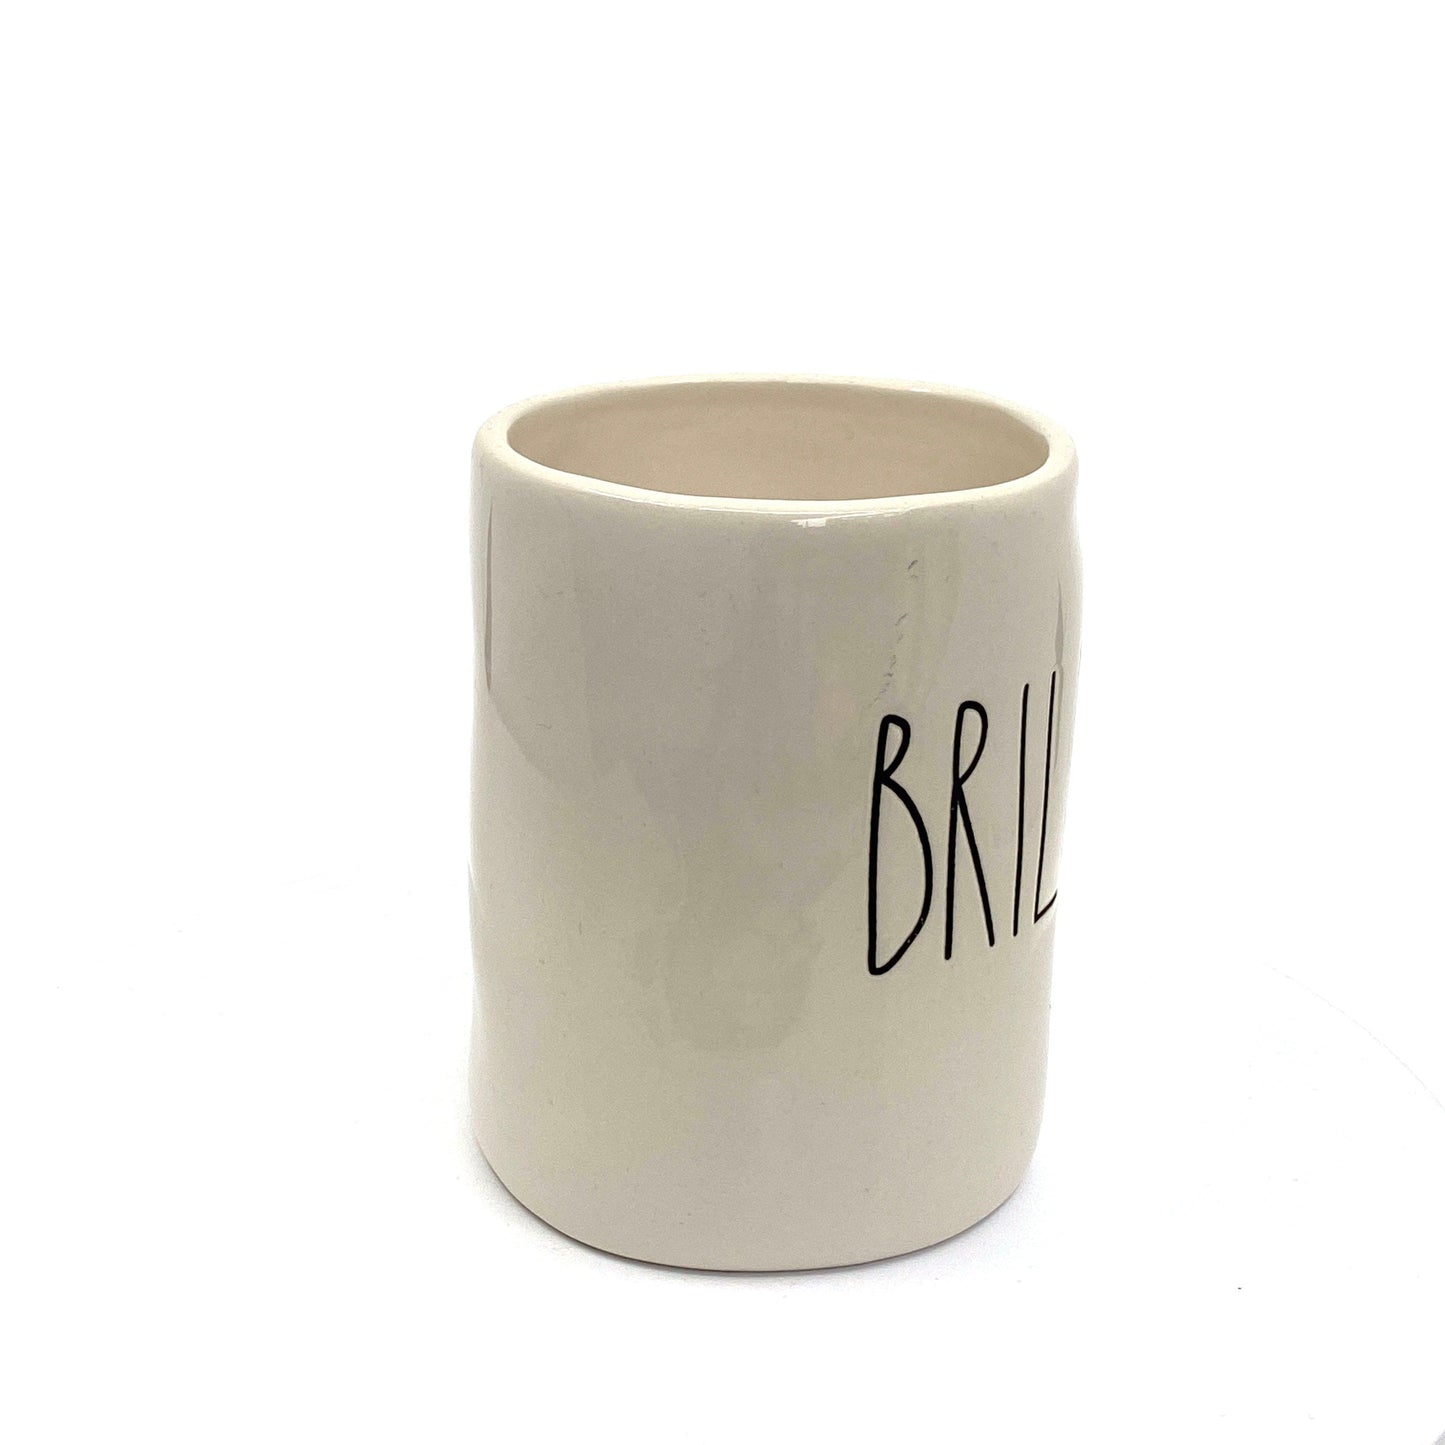 Rae Dunn Artisan Collection ‘BRILLIANT’ Large Letter White Coffee Cup Mug By Magenta